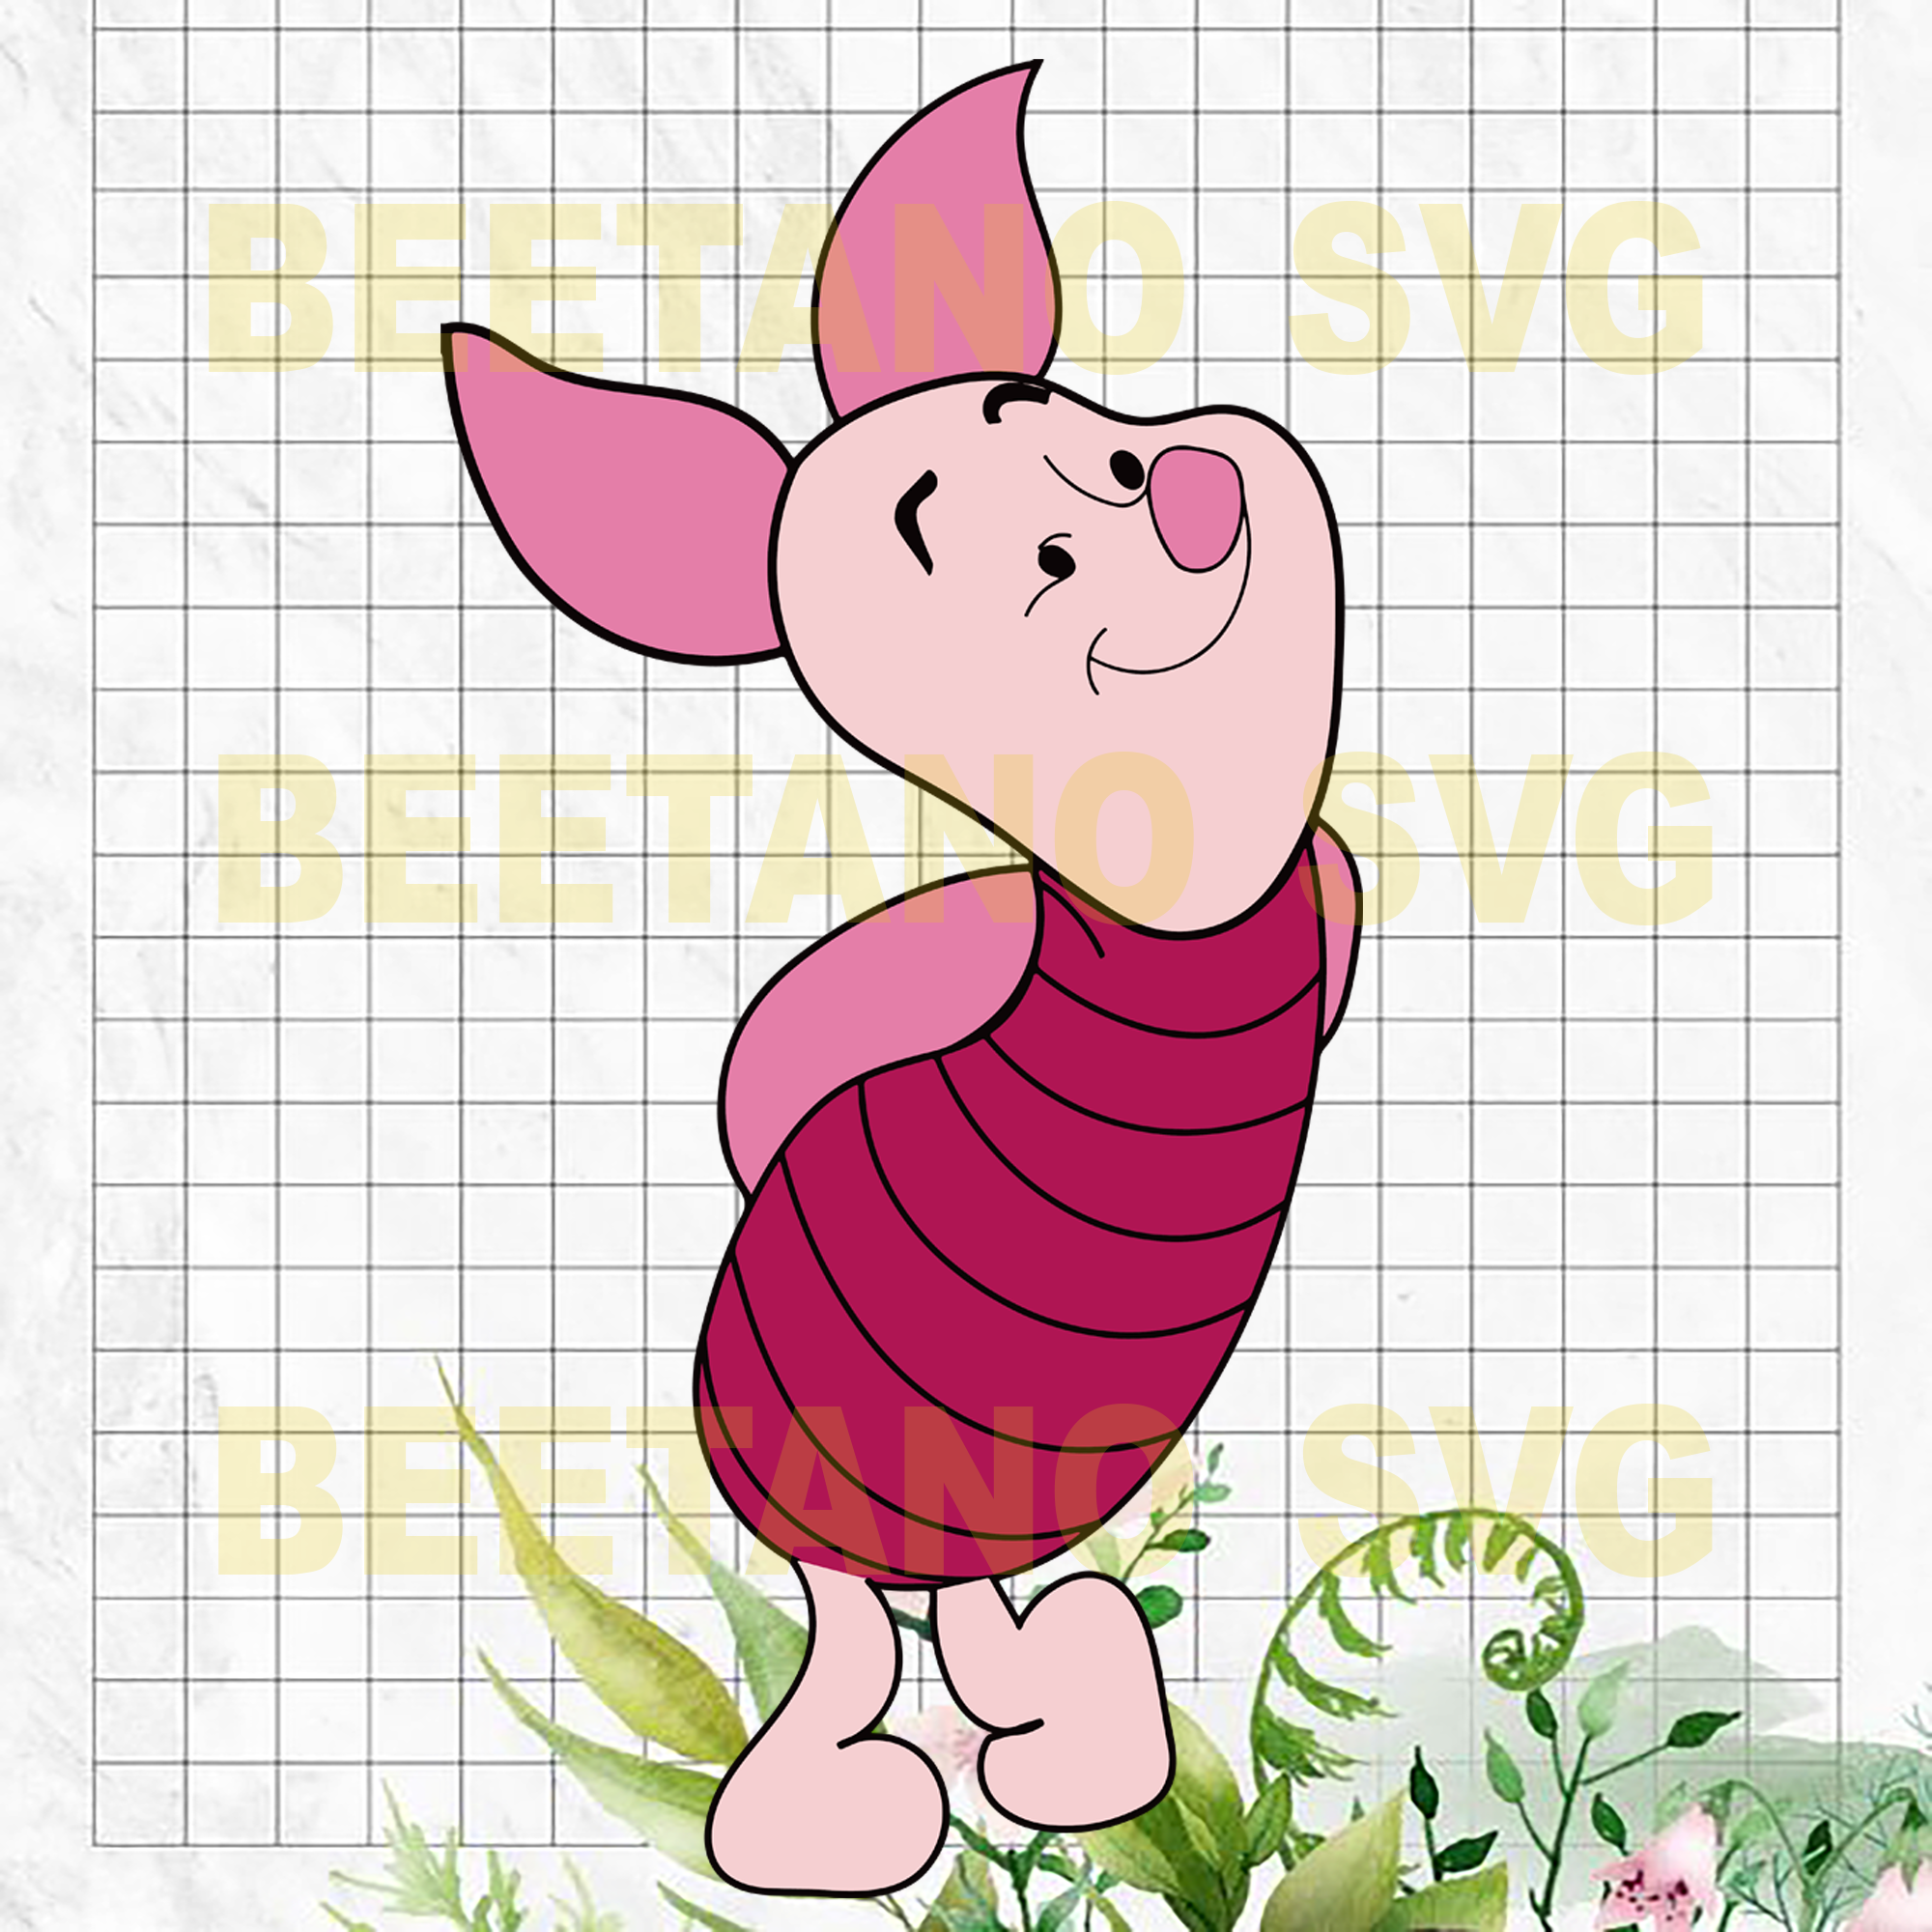 Download Piglet Winnie Pooh Svg Piglet Winnie Pooh Cutting Files For Cricut S Beetanosvg Scalable Vector Graphics